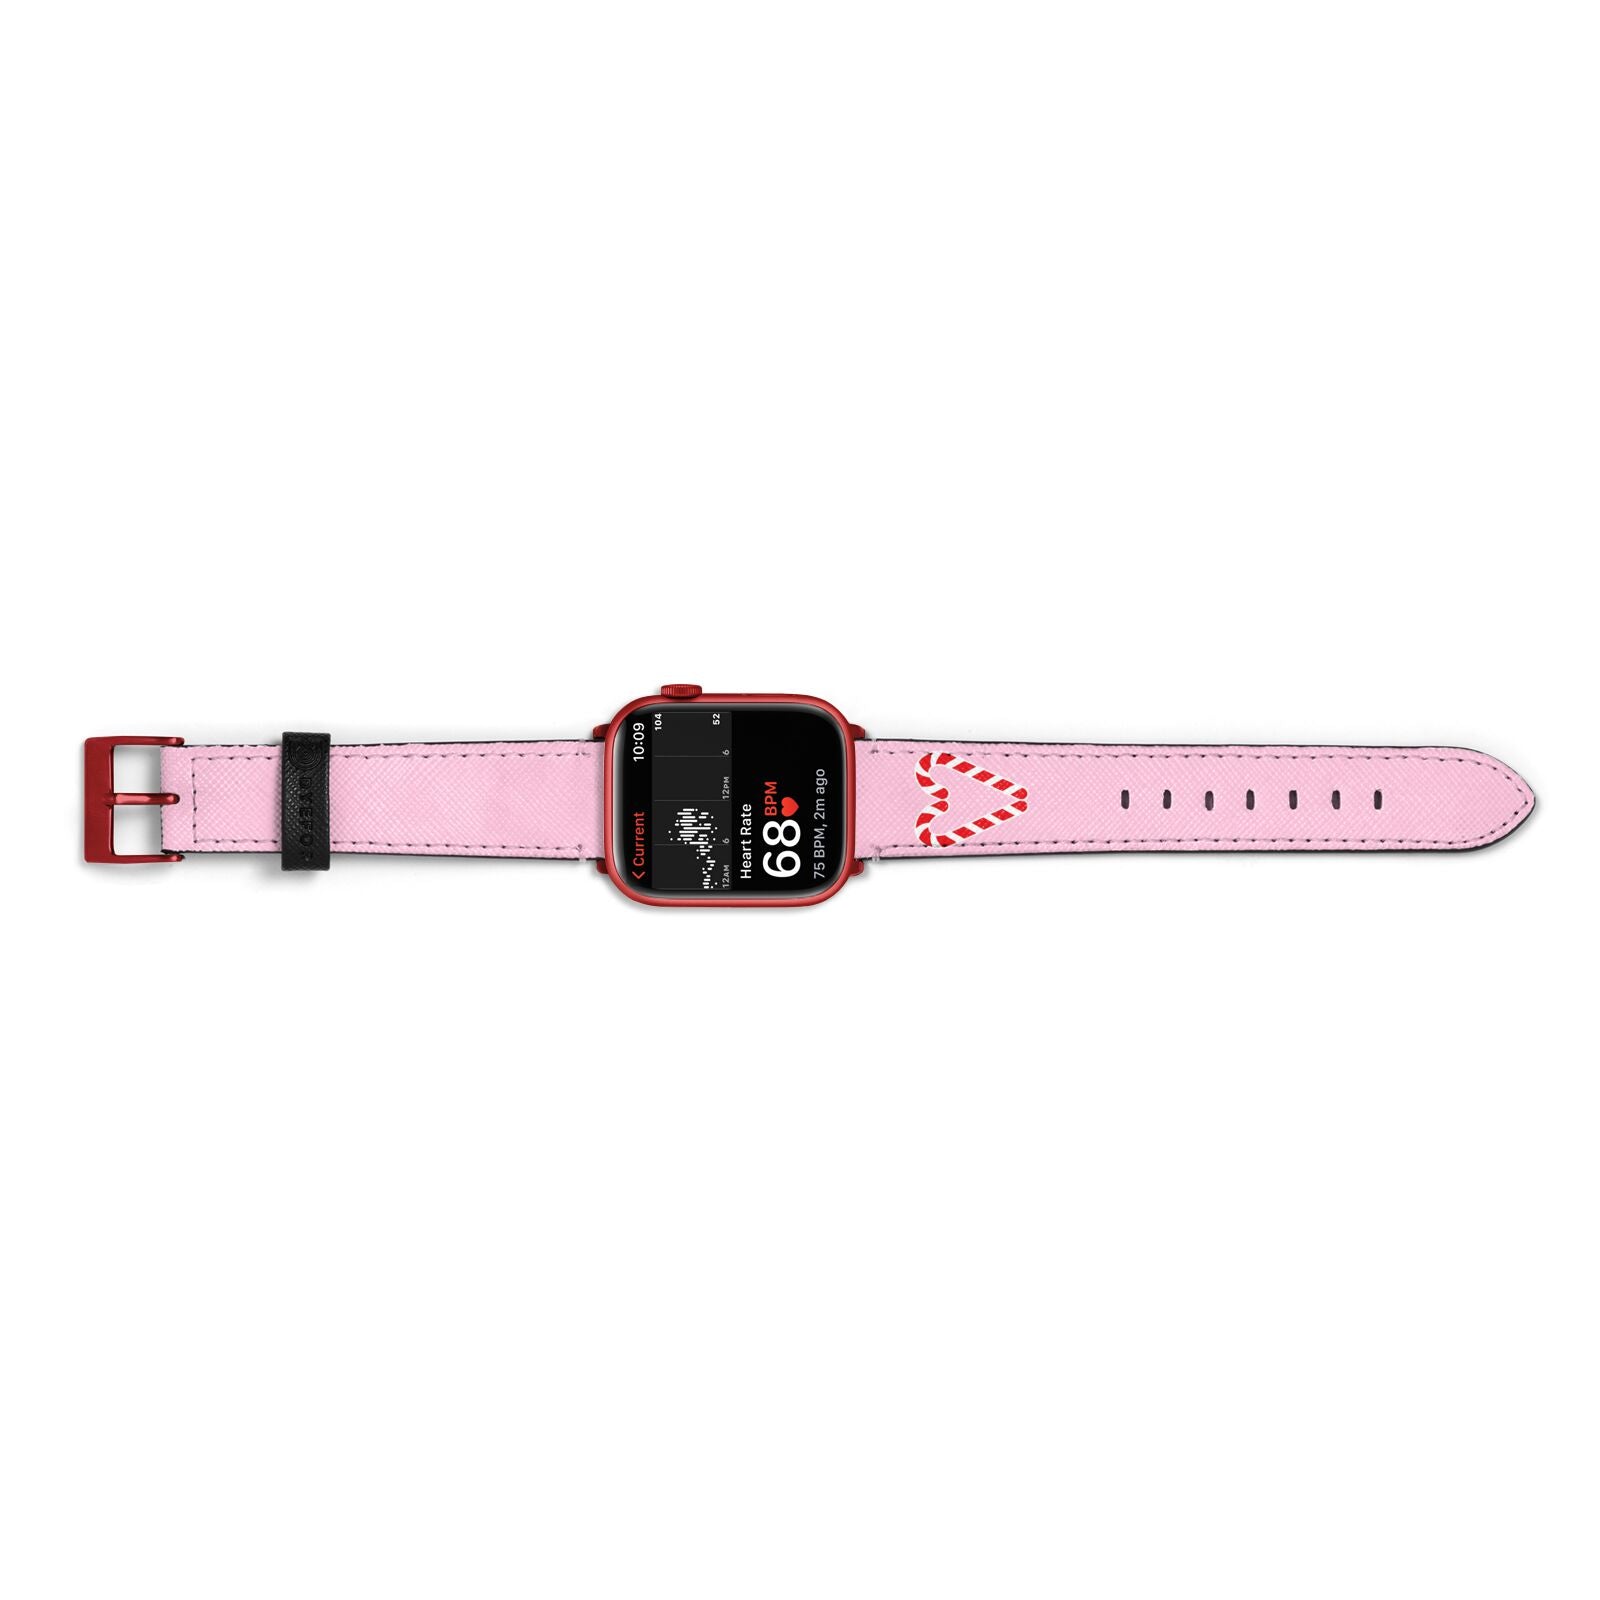 Candy Cane Heart Apple Watch Strap Size 38mm Landscape Image Red Hardware